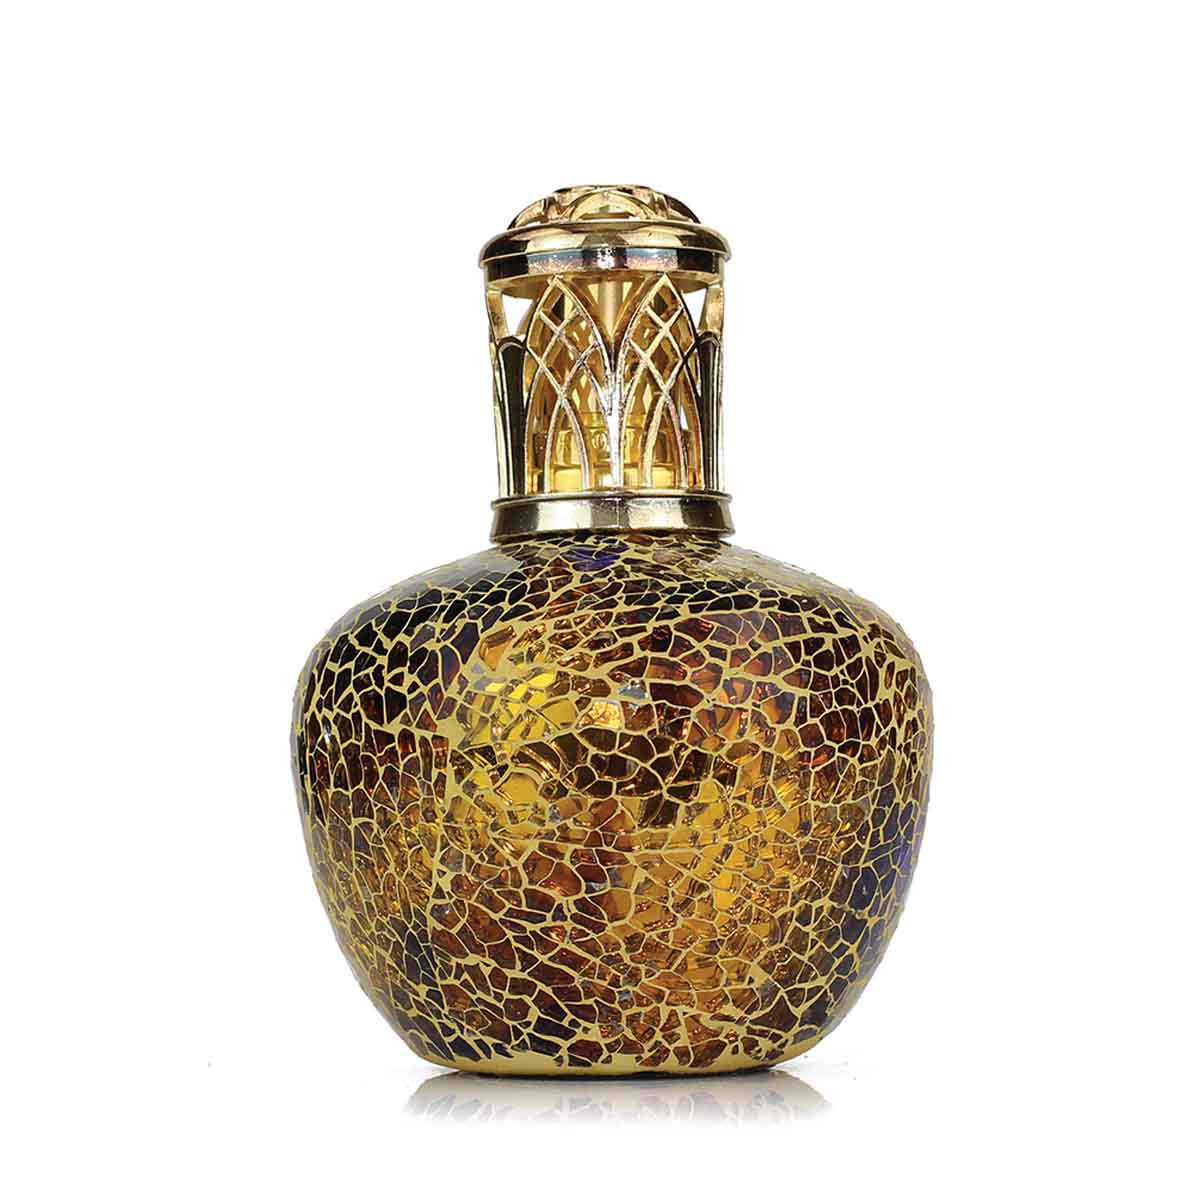 mosaic fragrance lamp in orange and browns | Carathea